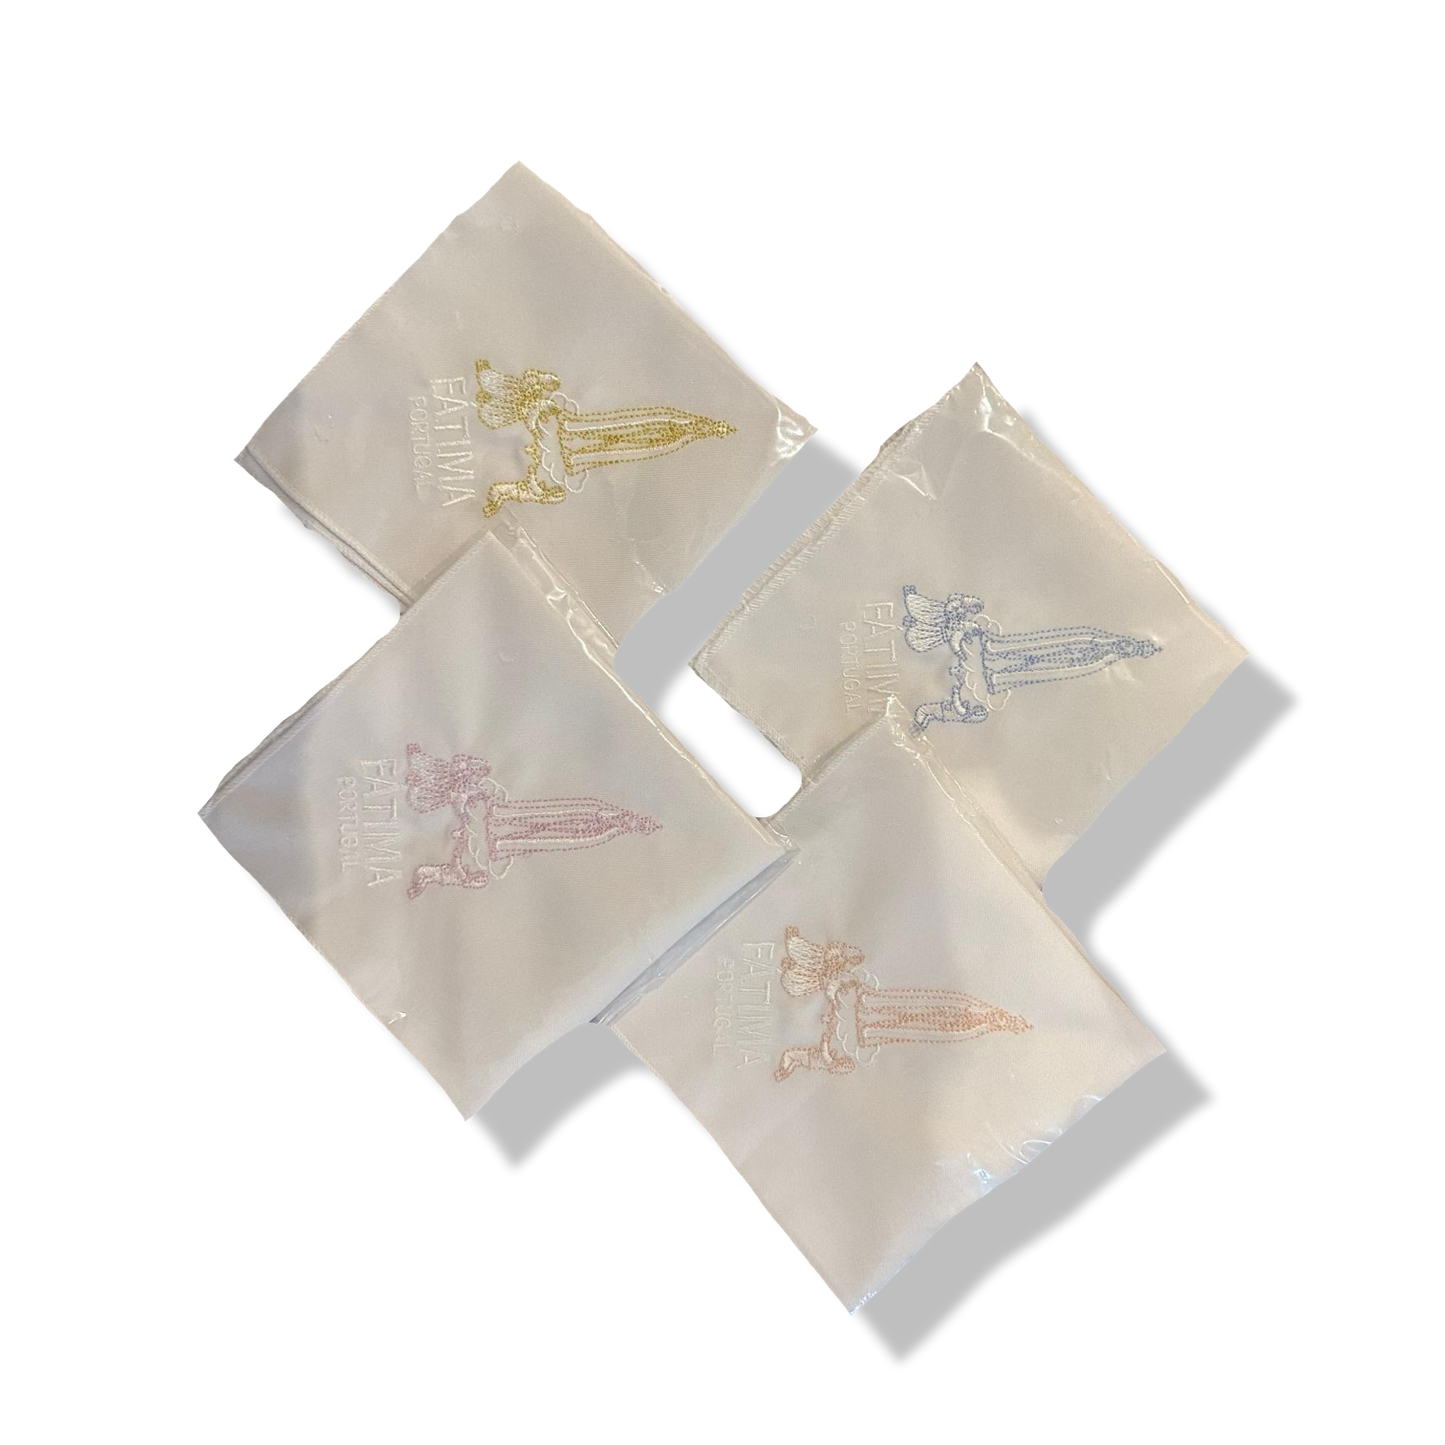 Our Lady of Fatima Handkerchief of Assorted Colors